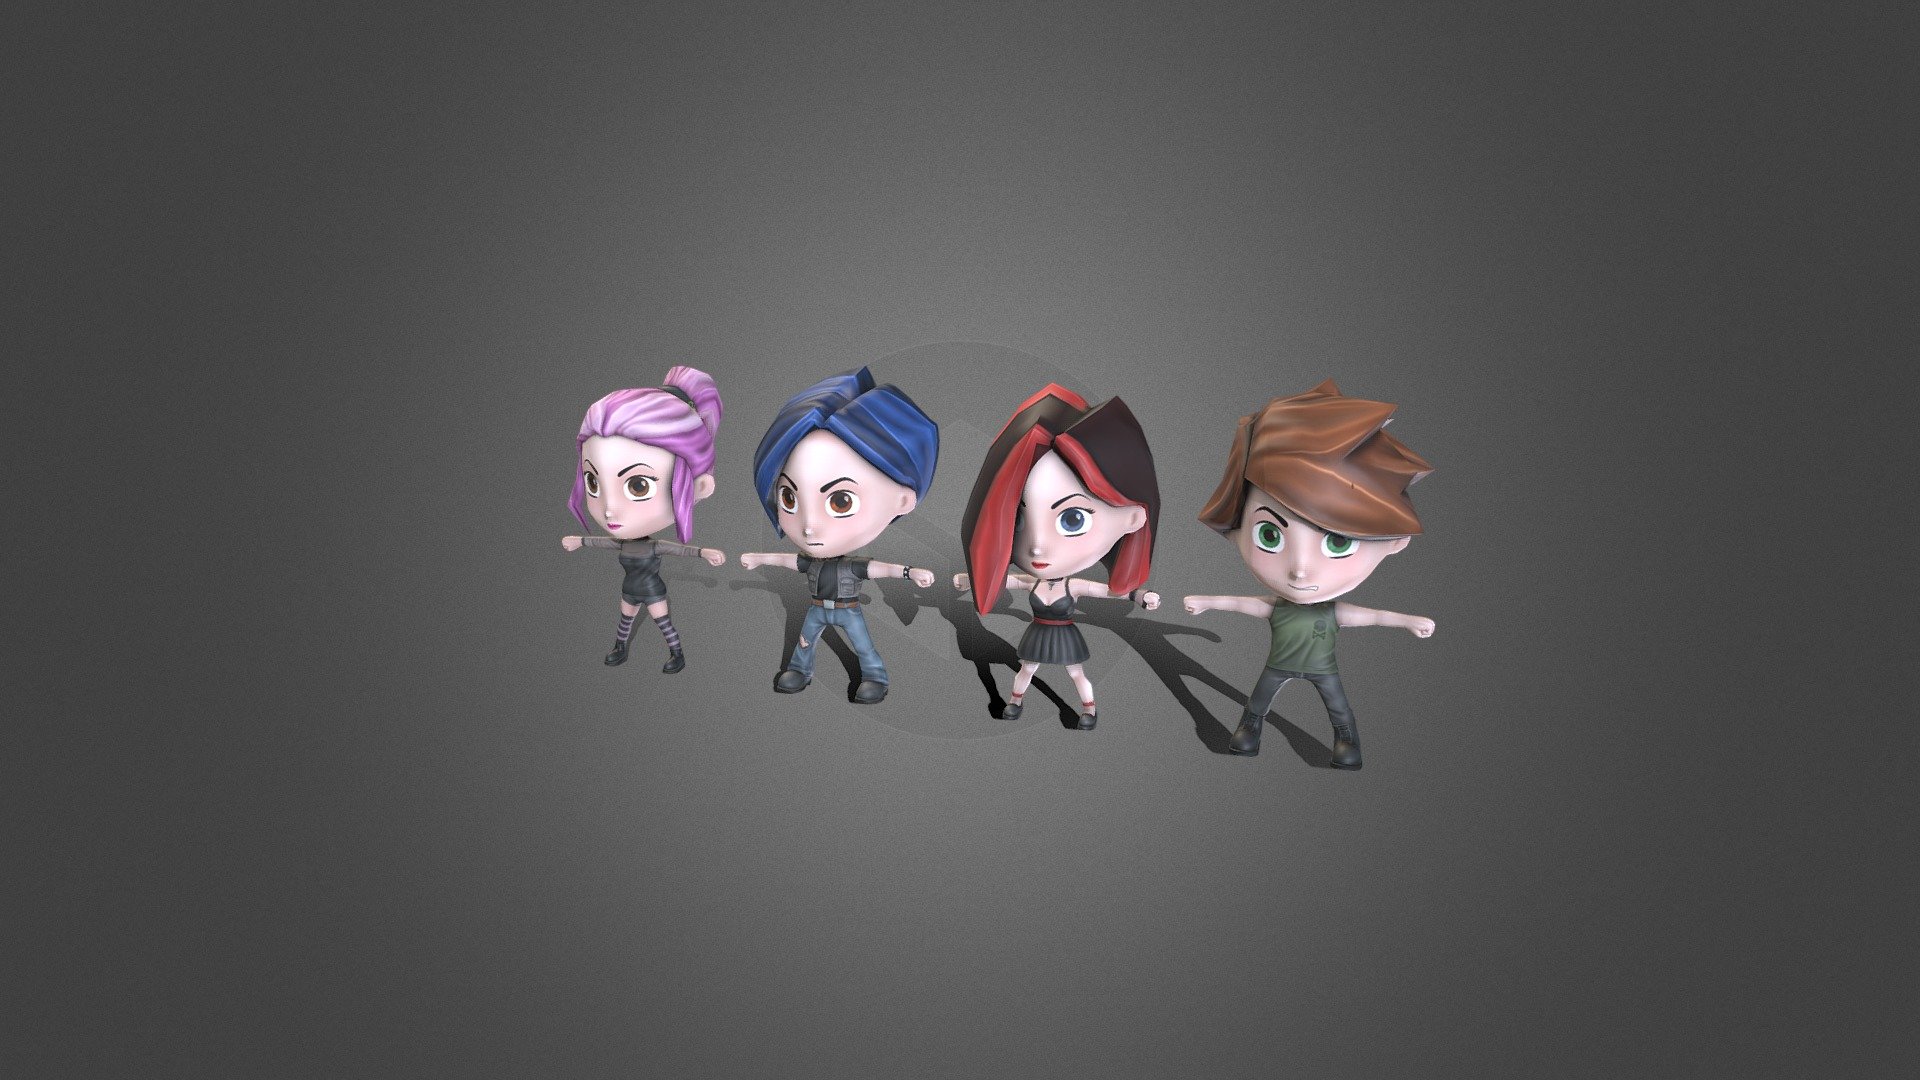 Low poly characters chibi style. Skinned 3d model